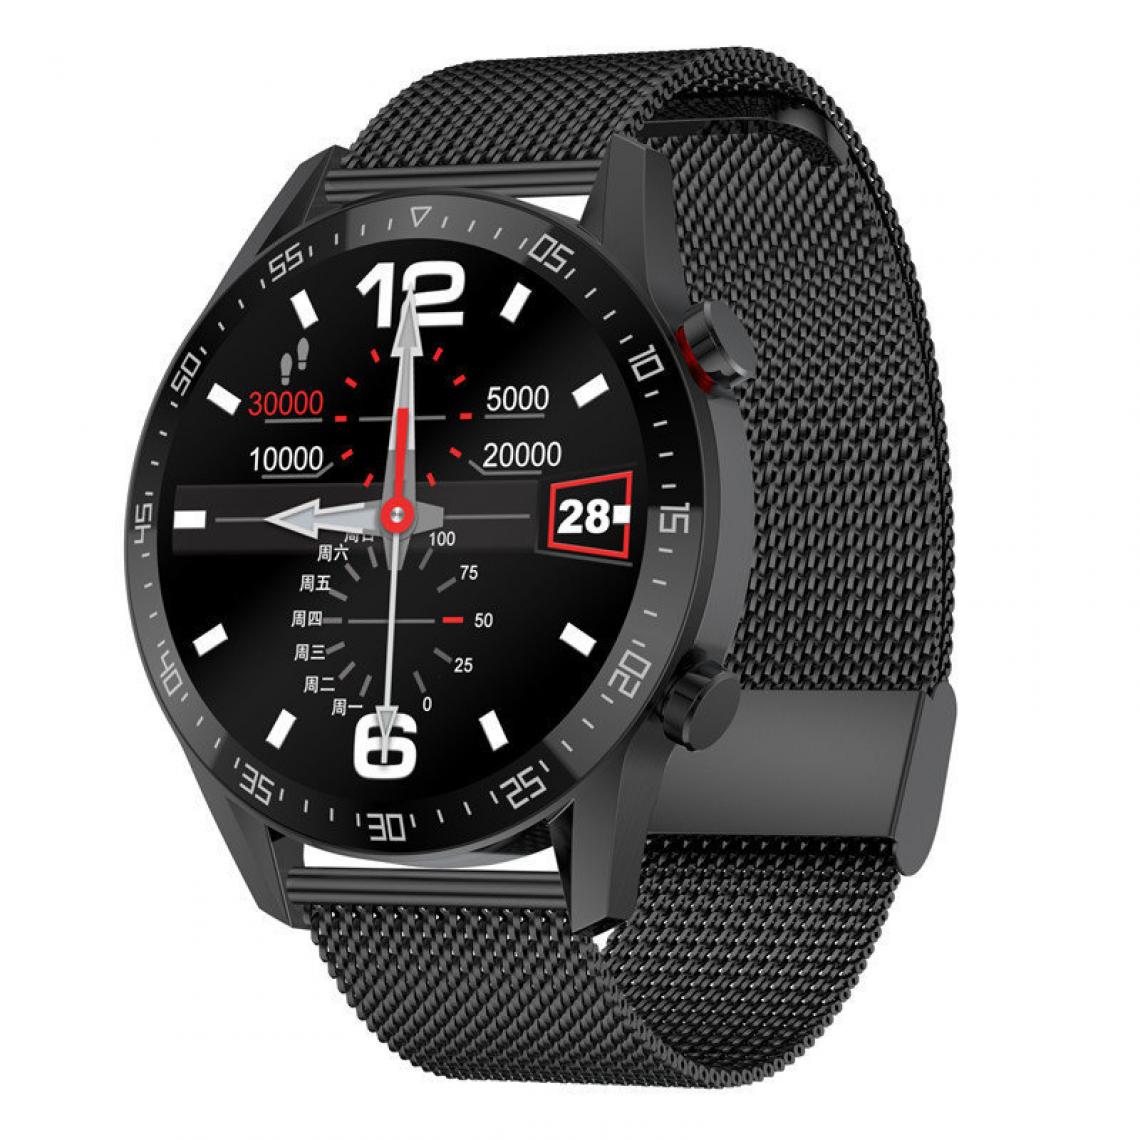 Chronotech Montres - Chronus Connected Watch, Men / Women 1.3 inch Touch Screen with IP68 Smart Watch, Heart Rate Monitor, Sleep Monitor(black) - Montre connectée